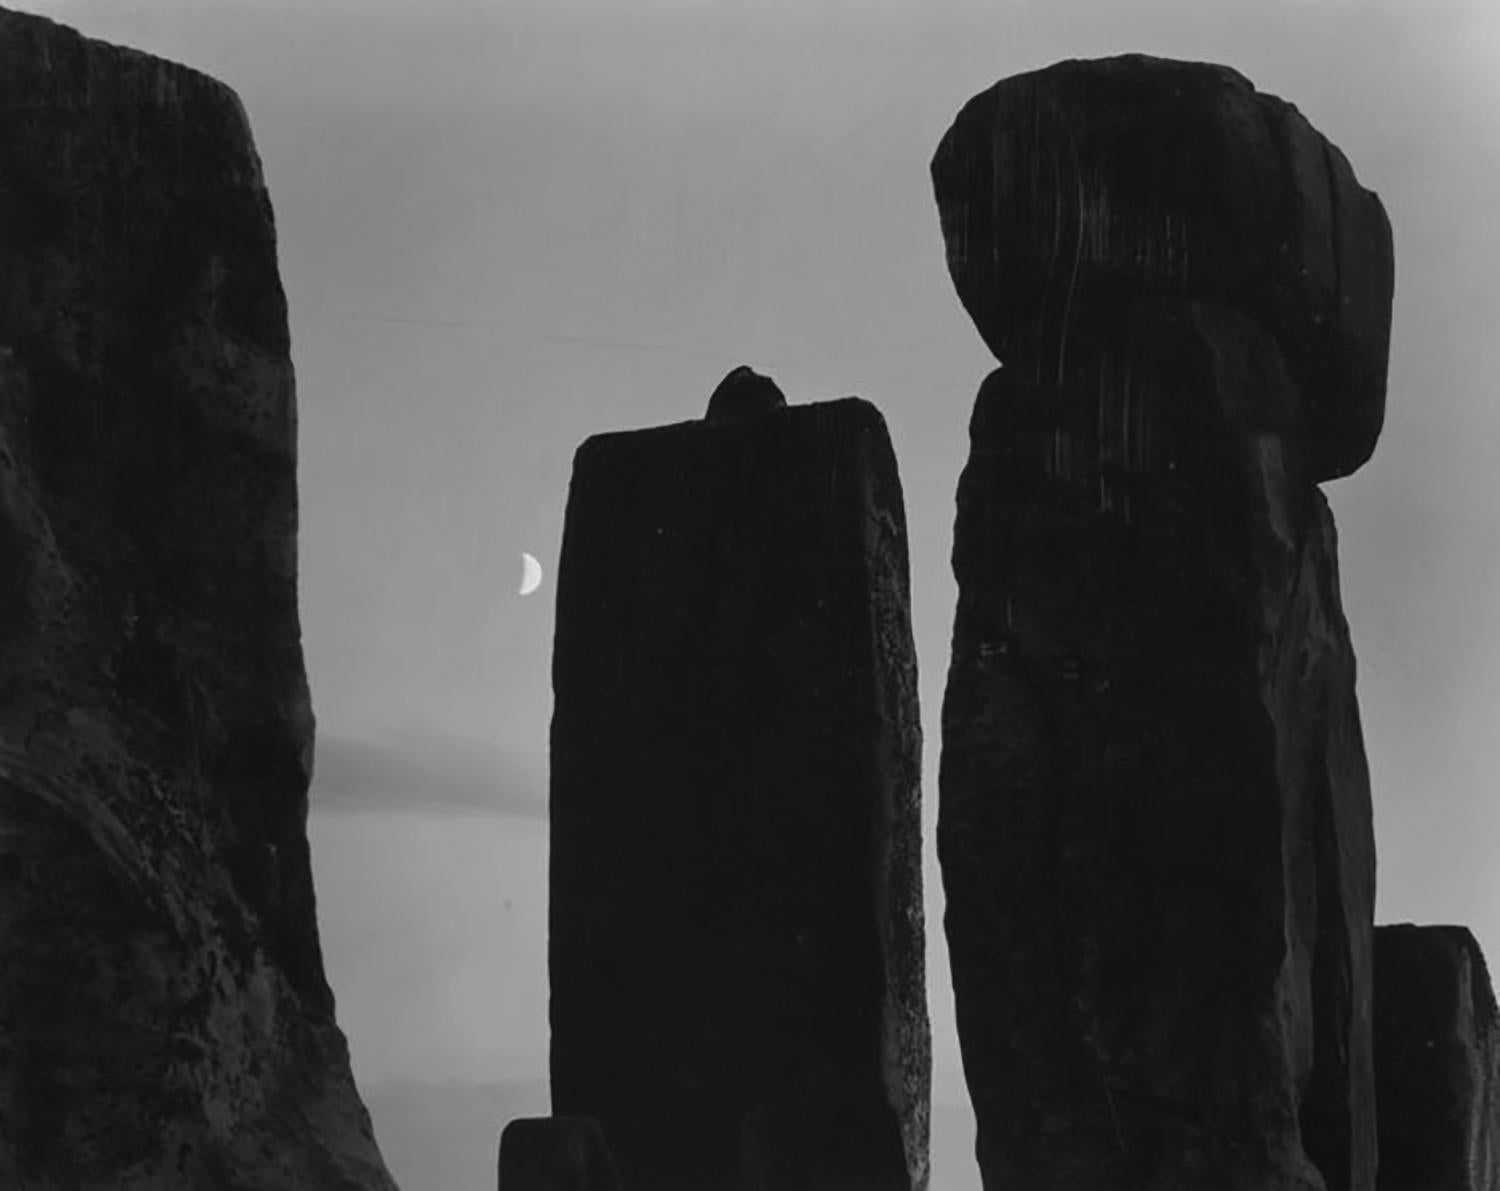 Paul Caponigro, Stonehenge with Moon, England, 1972, 6.5 x 8.25, silver gelatin print. Signed, titled and dated on mount recto. Excellent condition